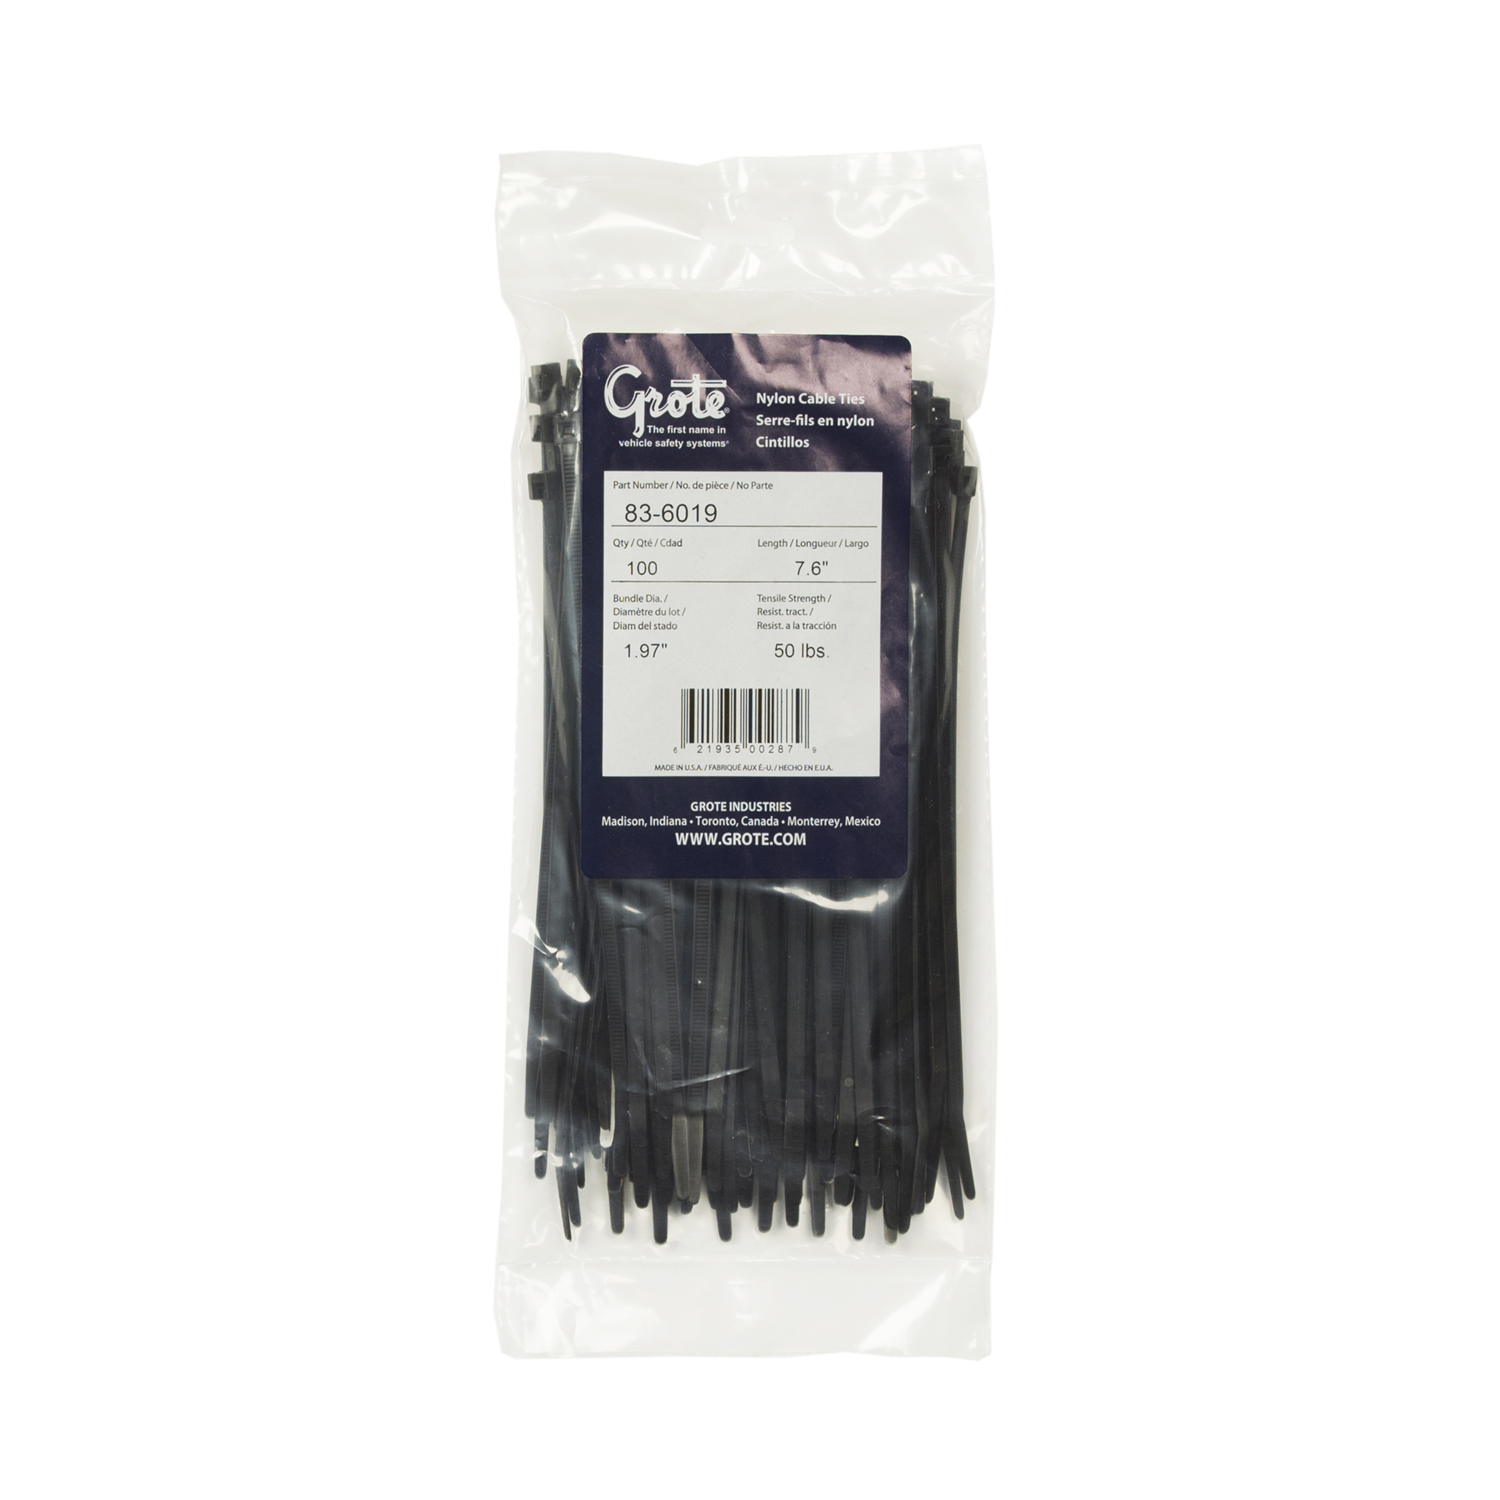 Nylon Cable Ties Standard Duty, 8" Length, 100 Pack